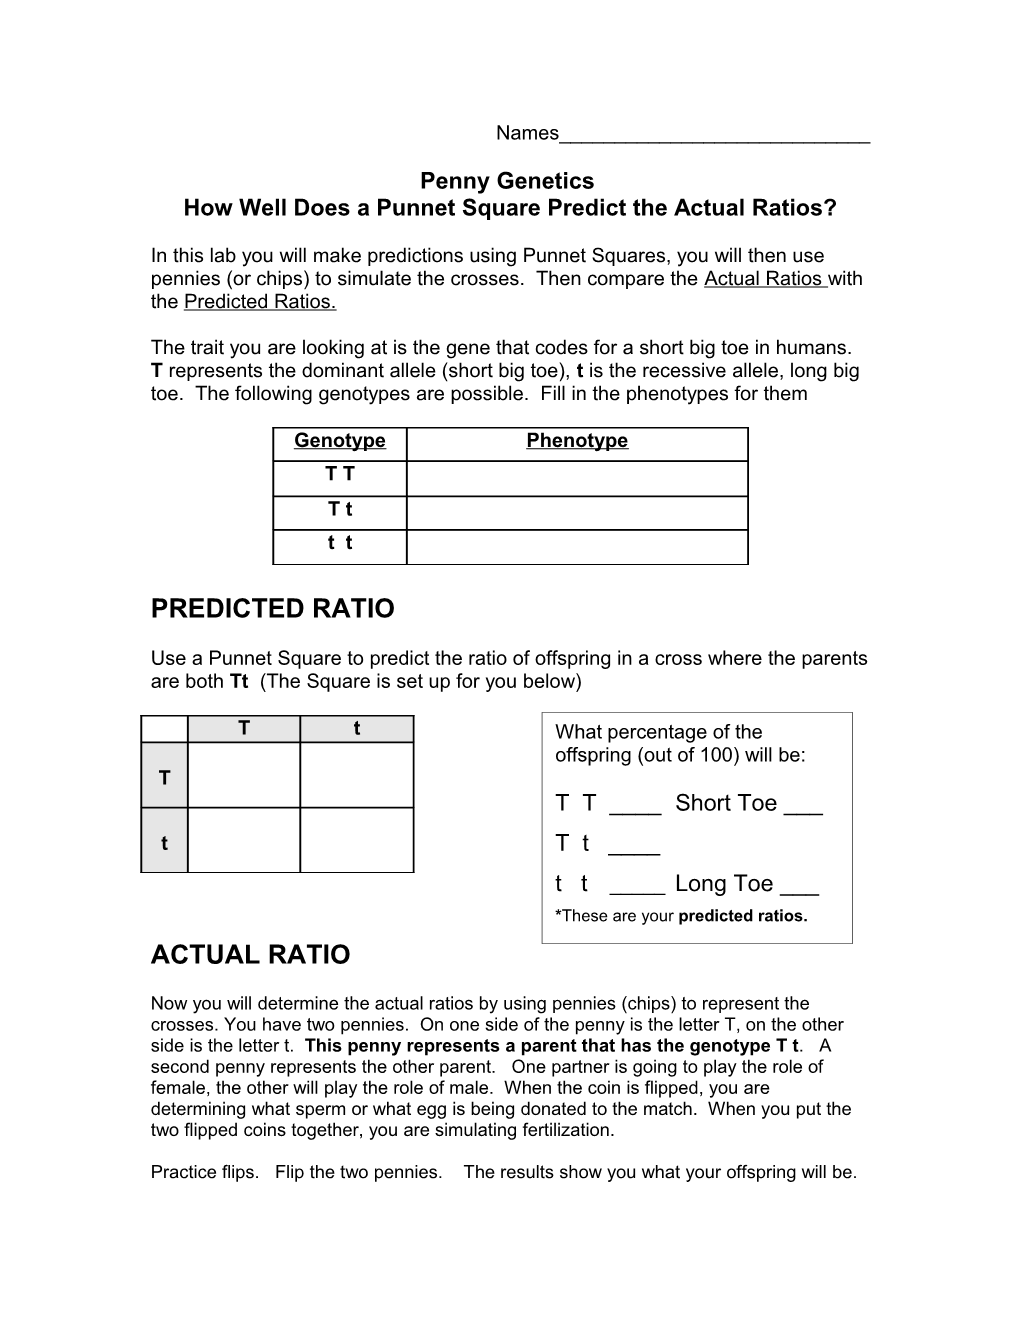 Penny Genetics How Well Does a Punnet Square Predict the Actual Ratios?